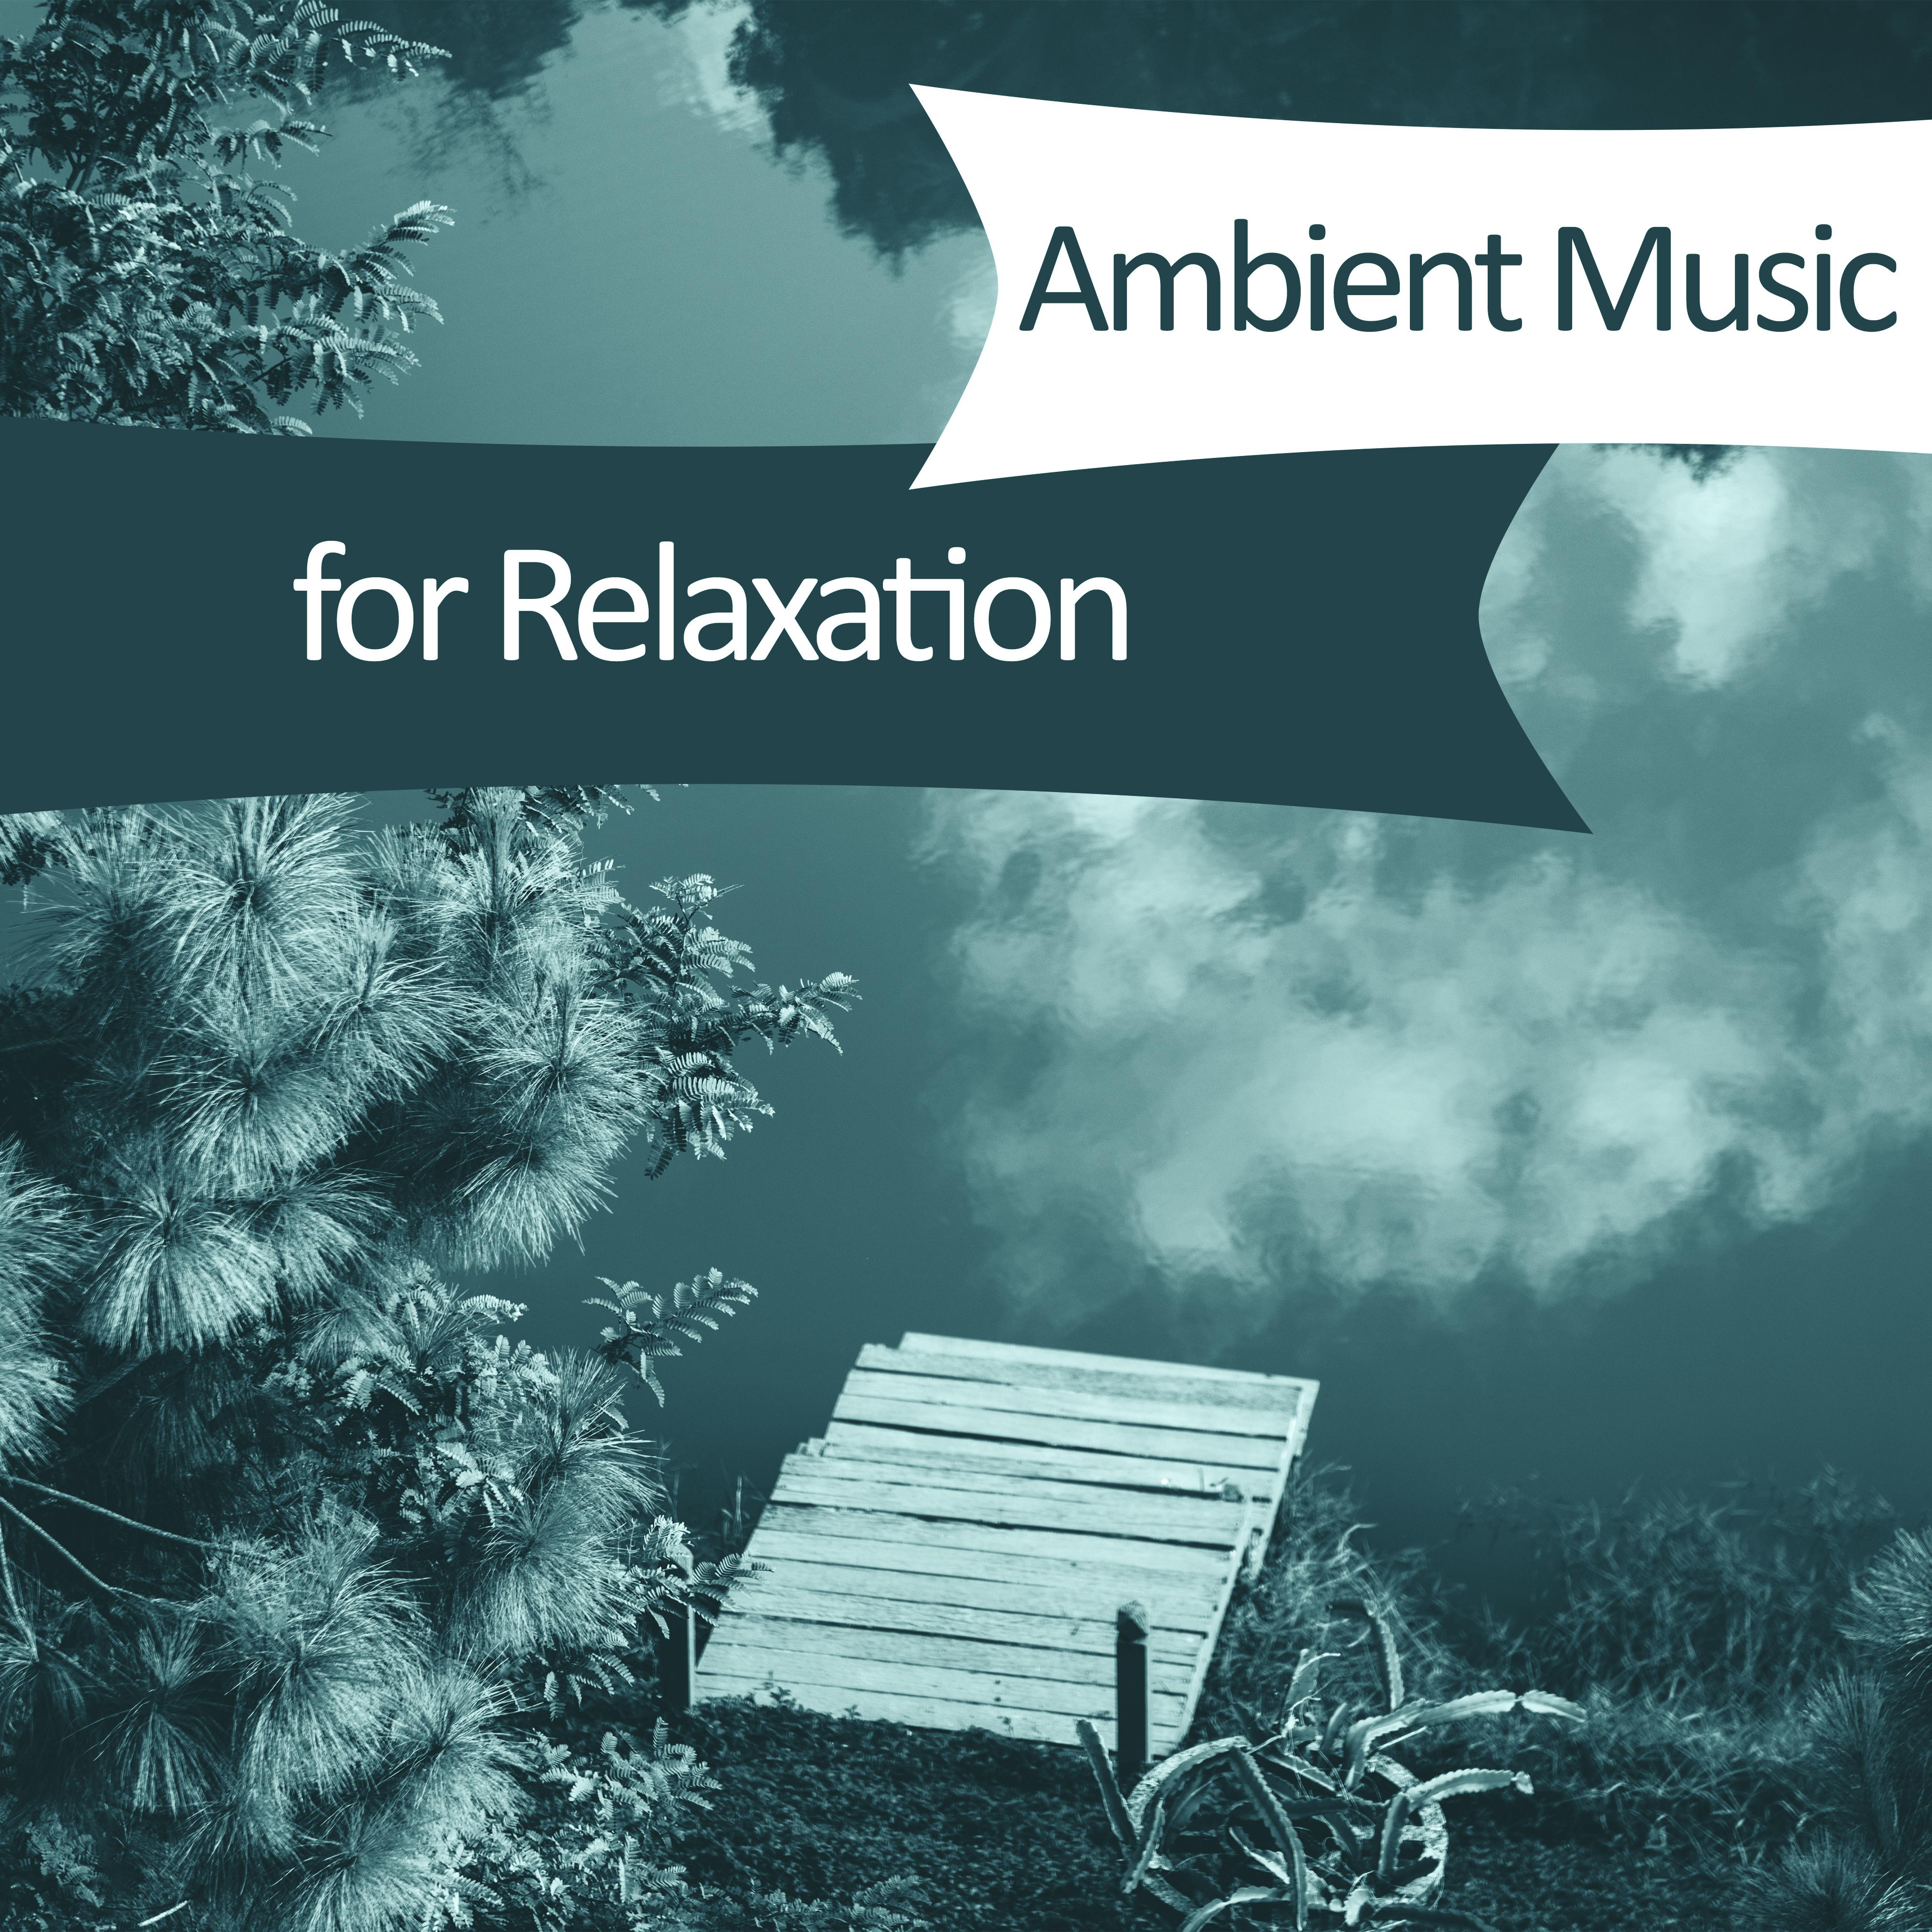 Ambient Music for Relaxation  Soothing Piano, Flute Music, Peaceful Mind, Sounds Relieve Stress, Music for Relaxation